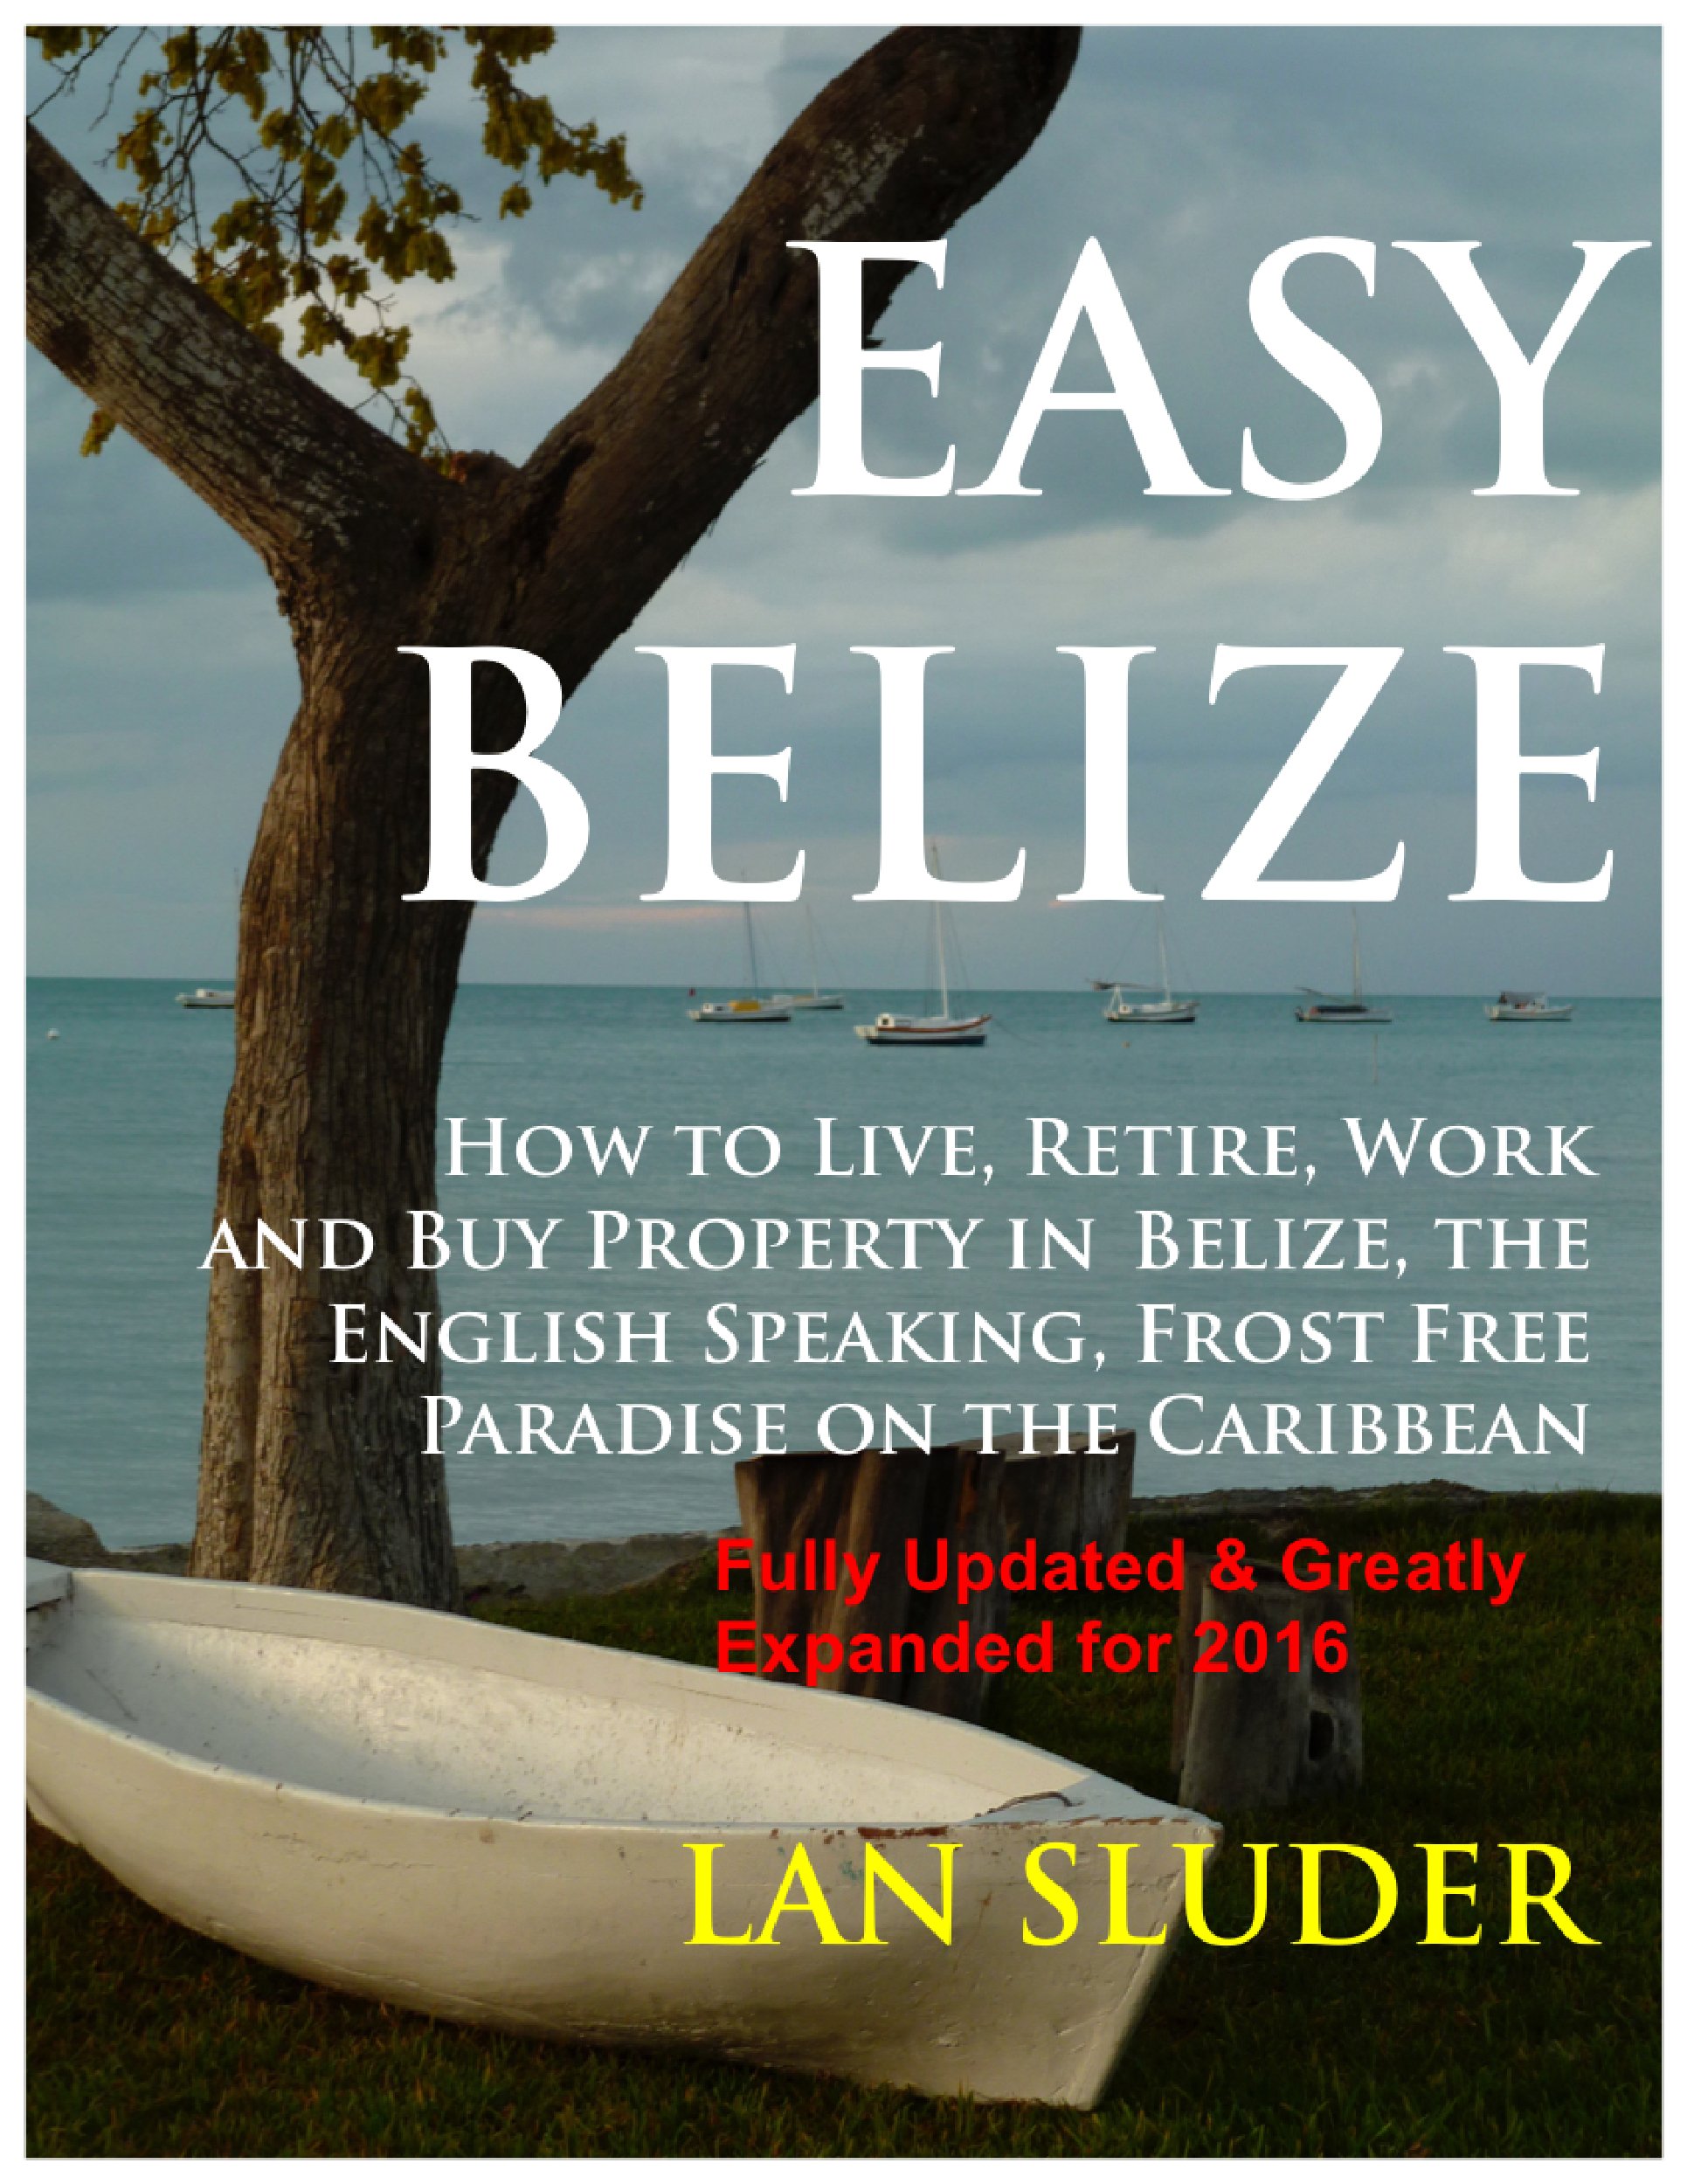 Book Cover EASY BELIZE How to Live, Retire, Work and Buy Property in Belize, the English Speaking, Frost Free Paradise on the Caribbean Coast